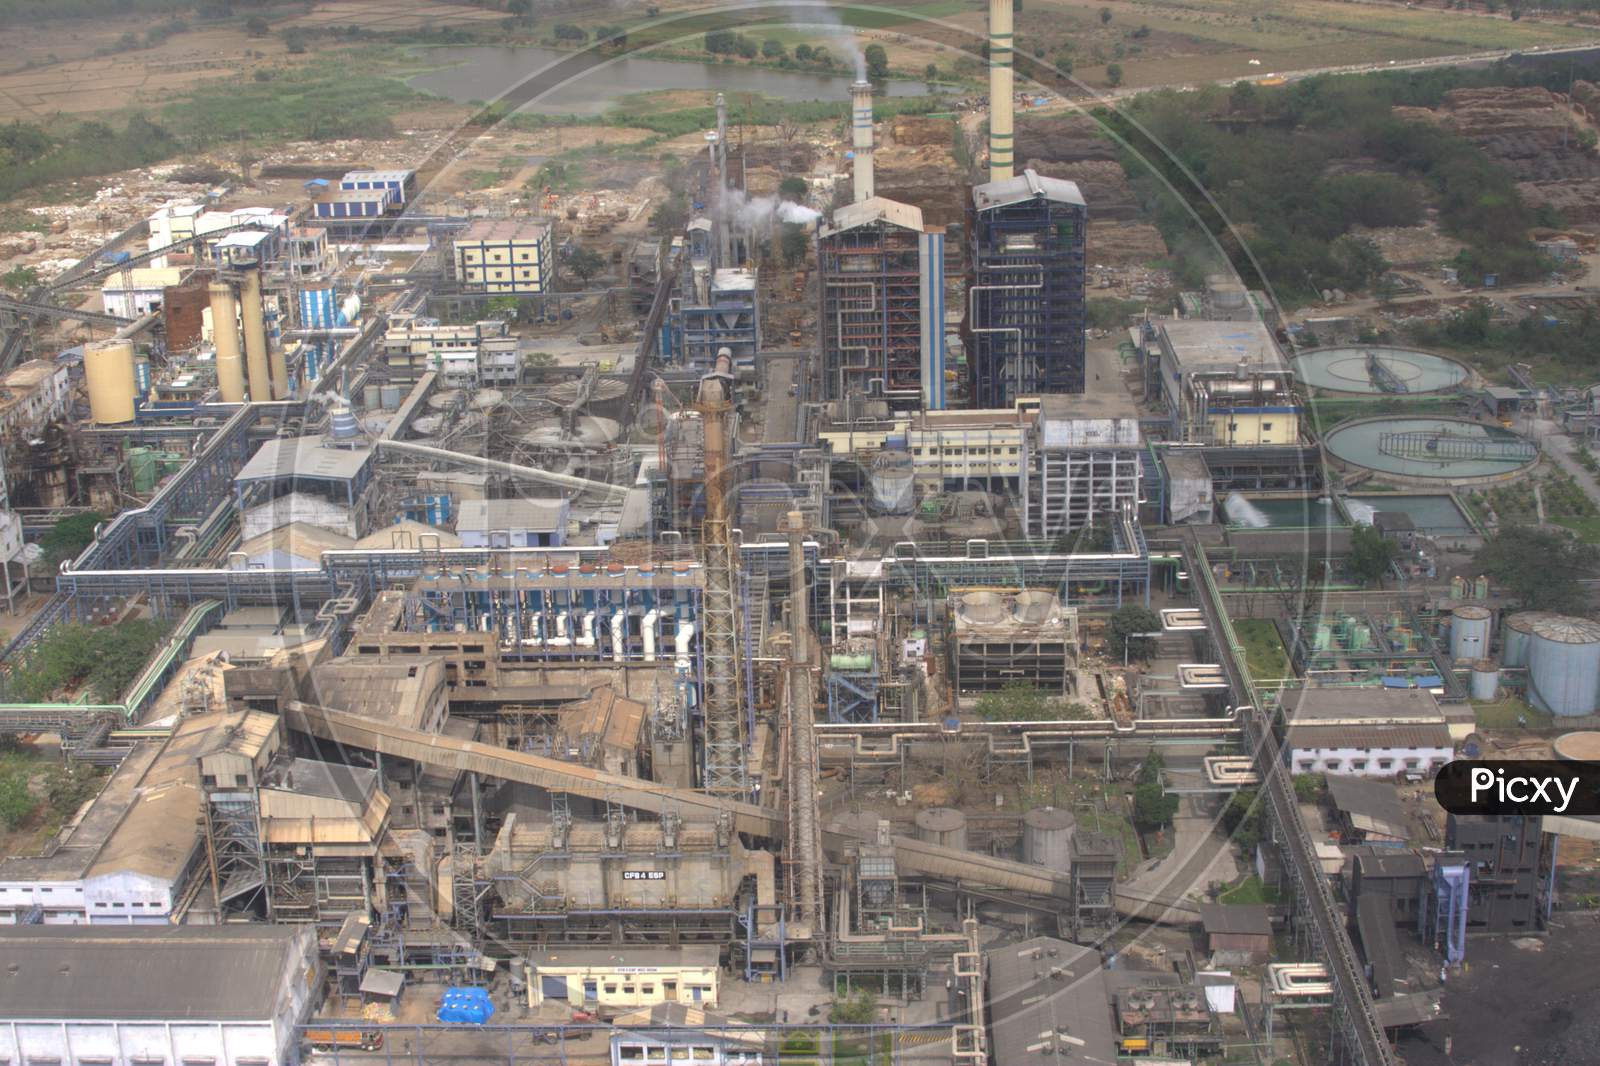 Aerial View Of an Industrial Plant With Exhaust Pipes And Smoke